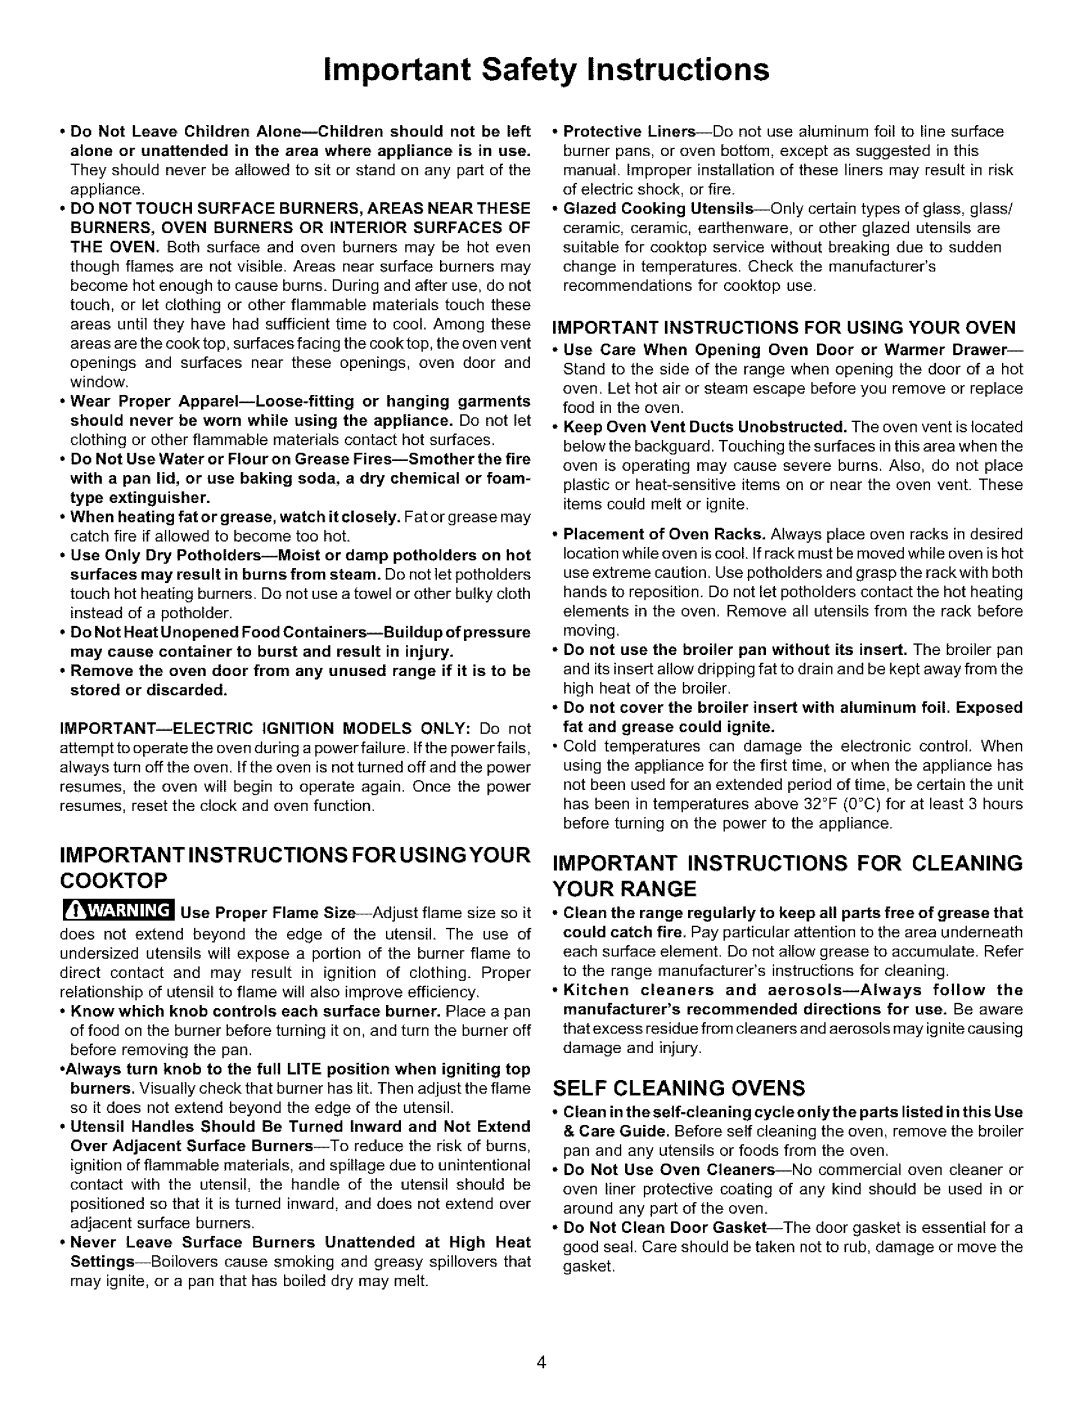 Kenmore 970-334421 manual Important Safety Instructions, Important Instructions For Using Your Cooktop, Self Cleaning Ovens 